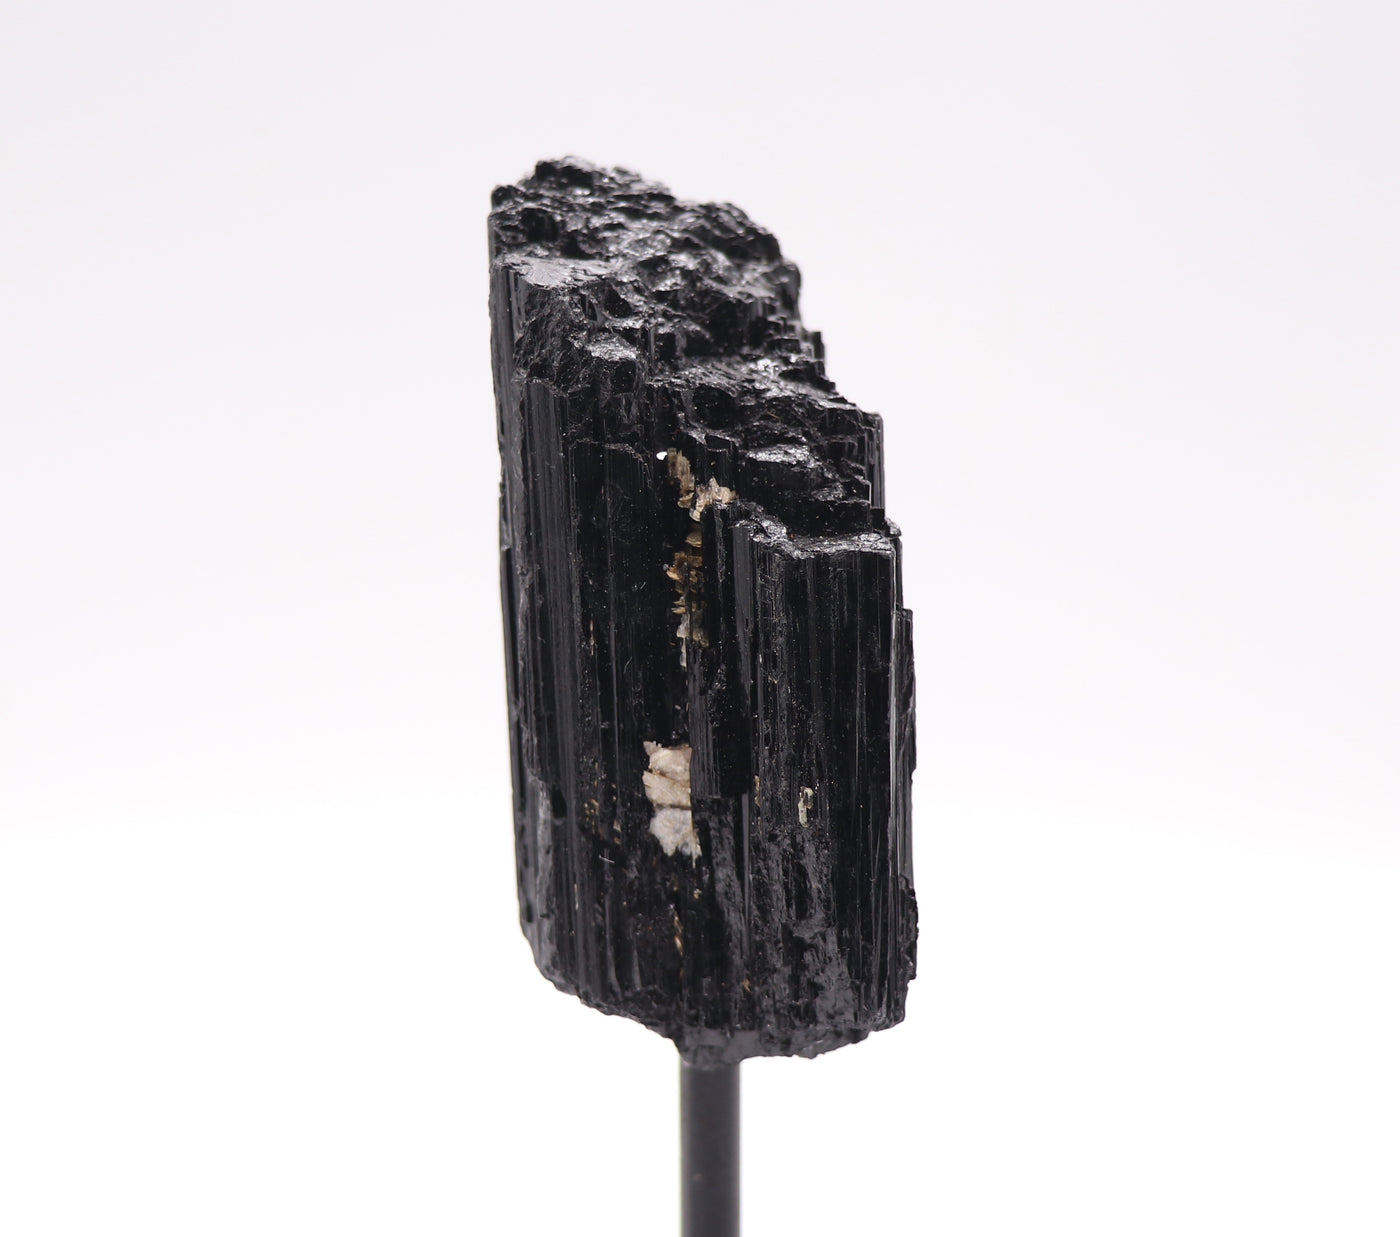 1174 Black Tourmaline on stand 320g 5.5in x 3in